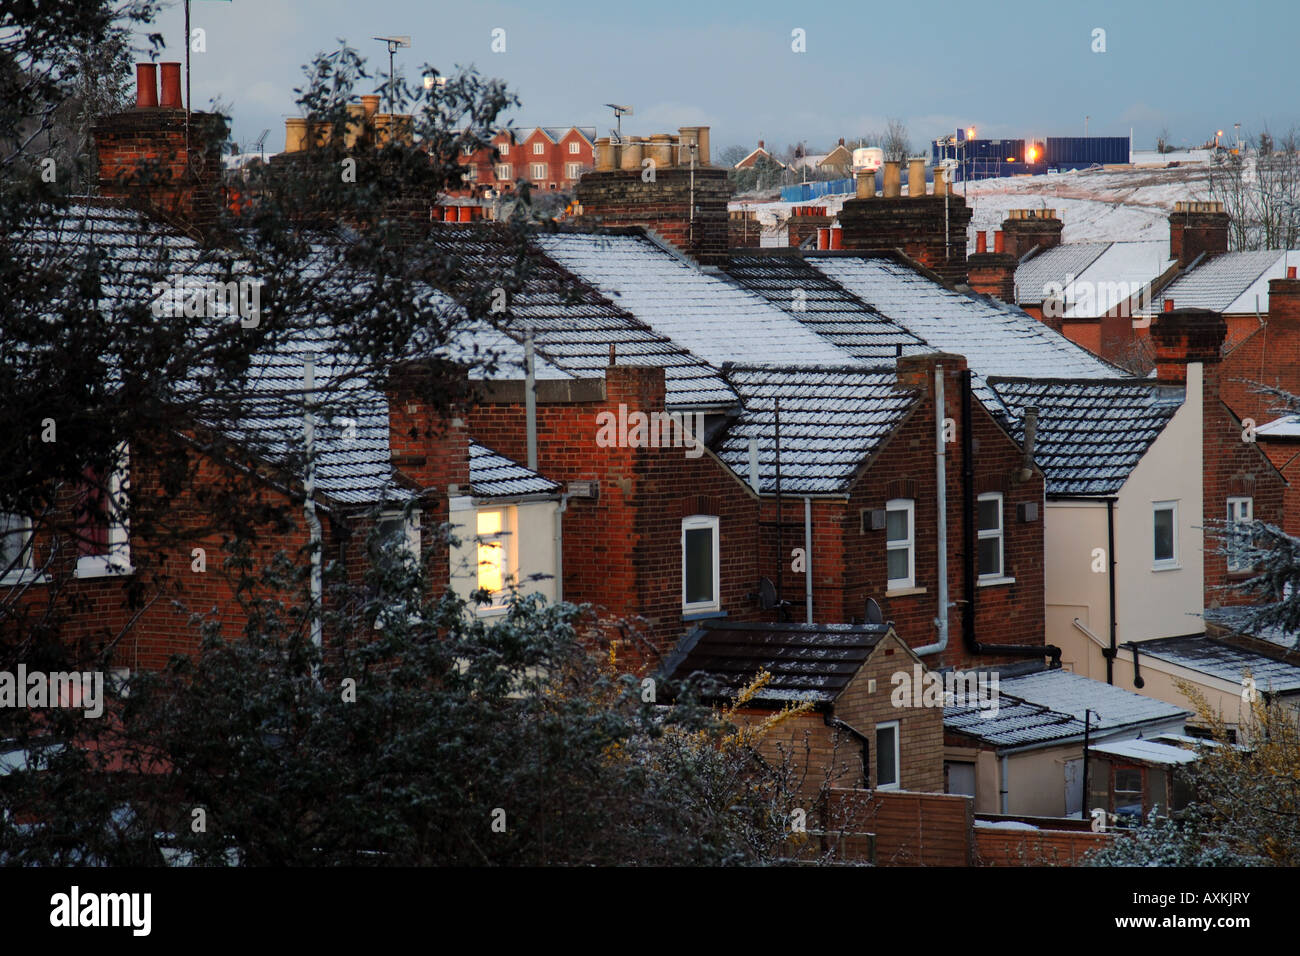 Backs of City Terraced houses at dusk in Winter Snow Stock Photo